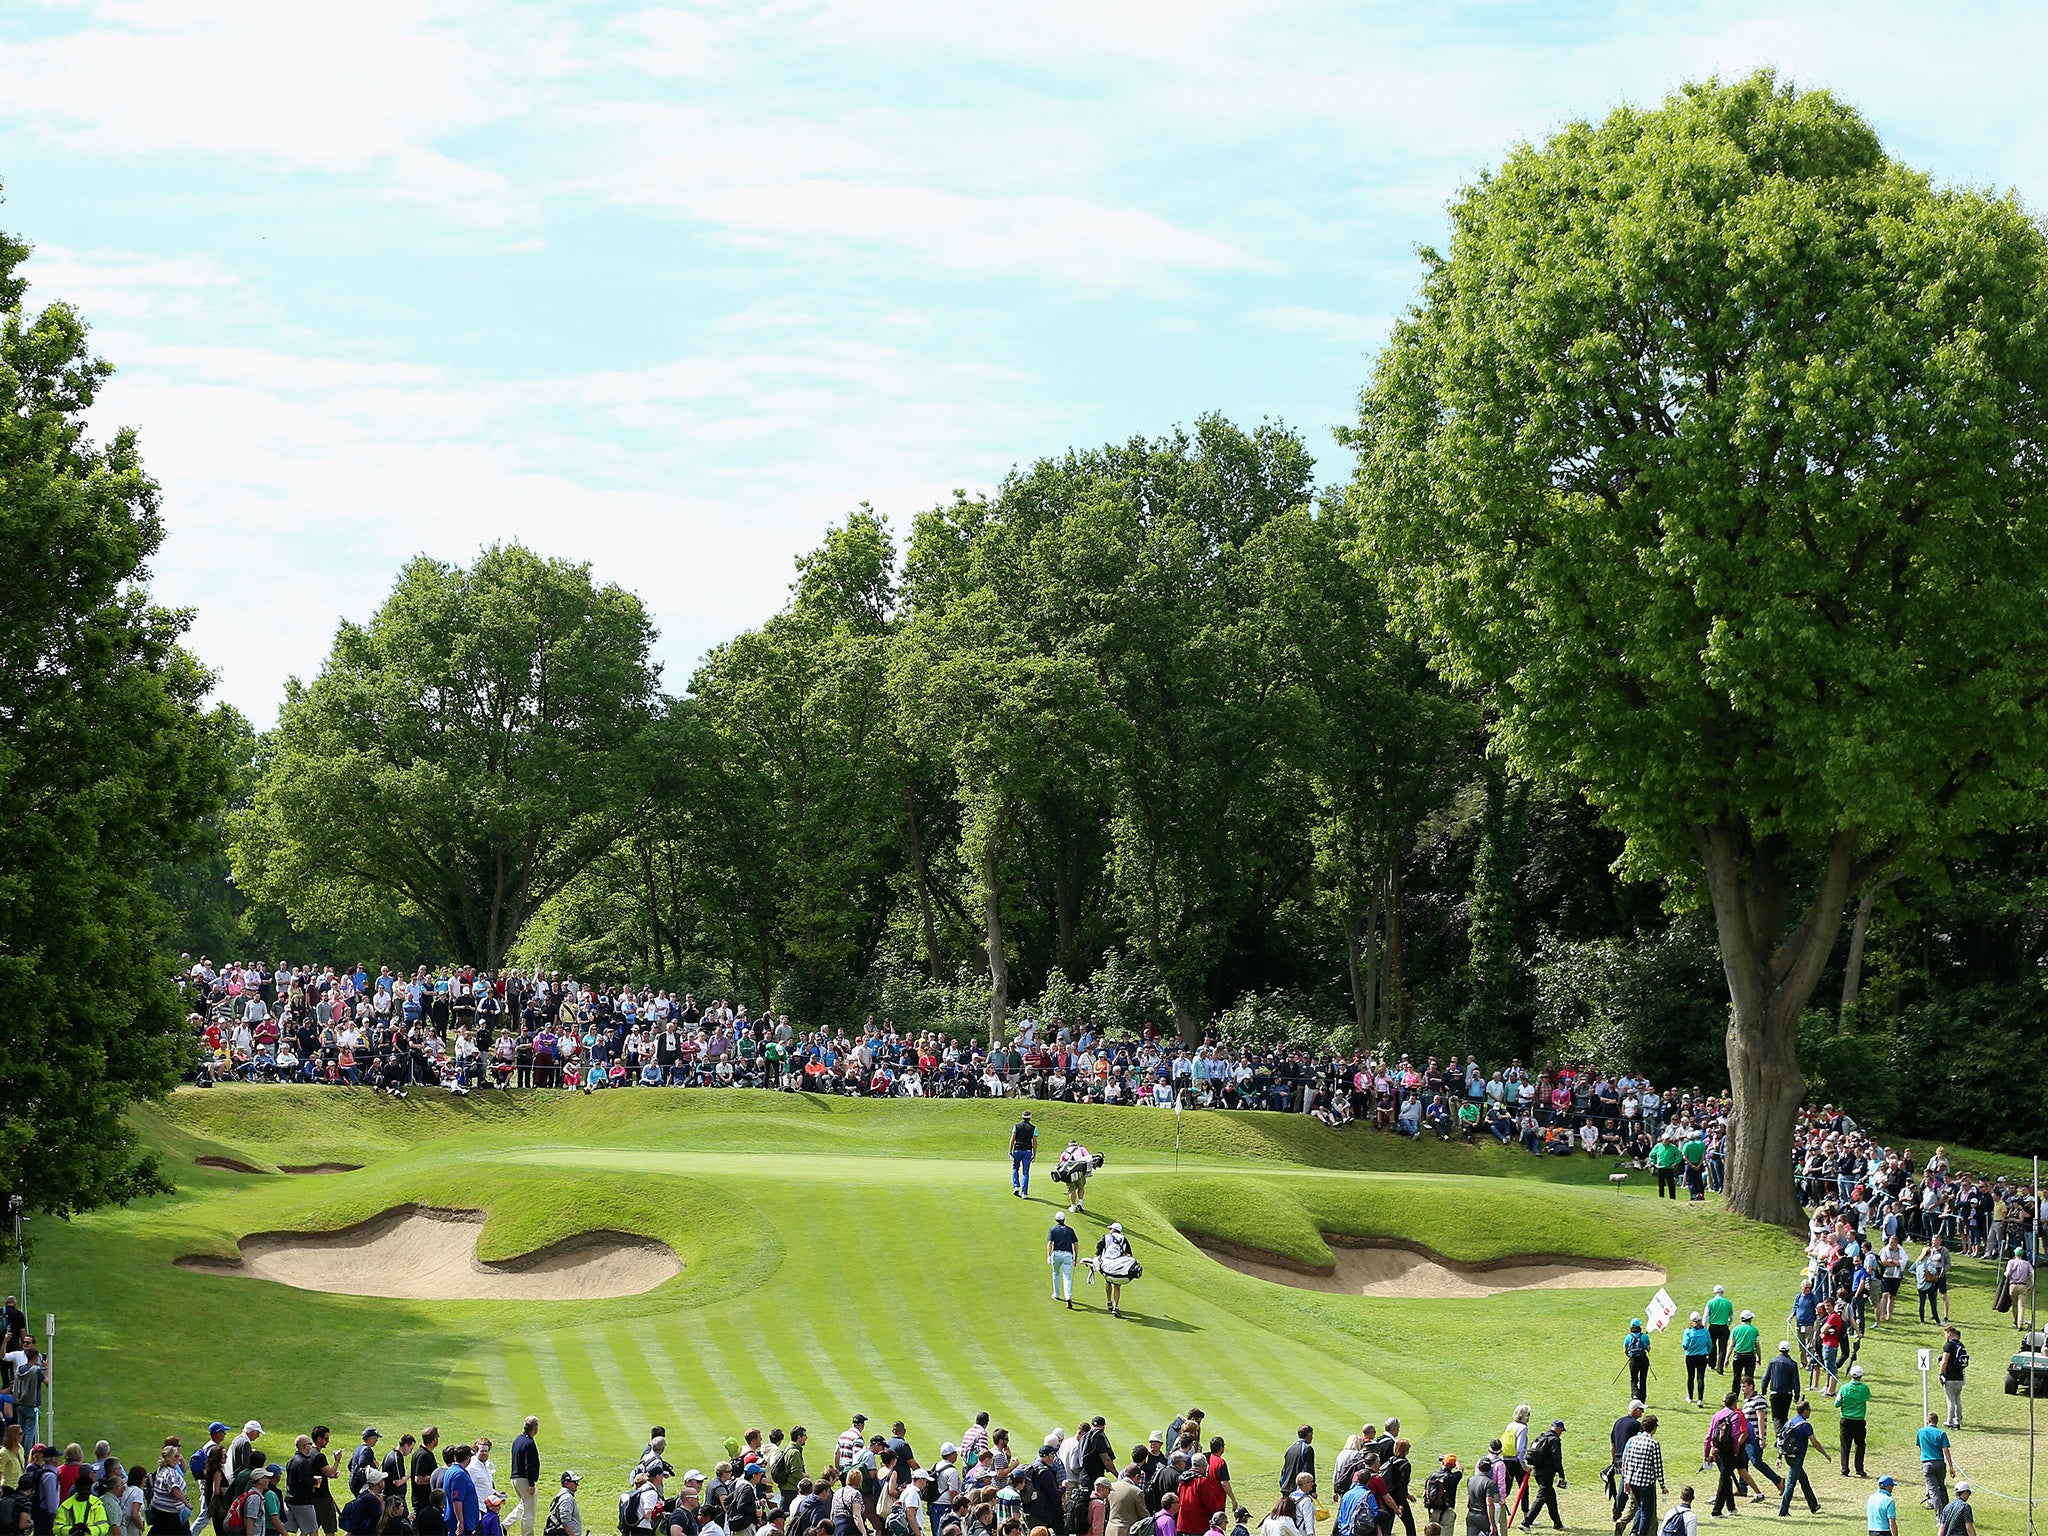 Wentworth has three championship courses and is the headquarters of the PGA European tour